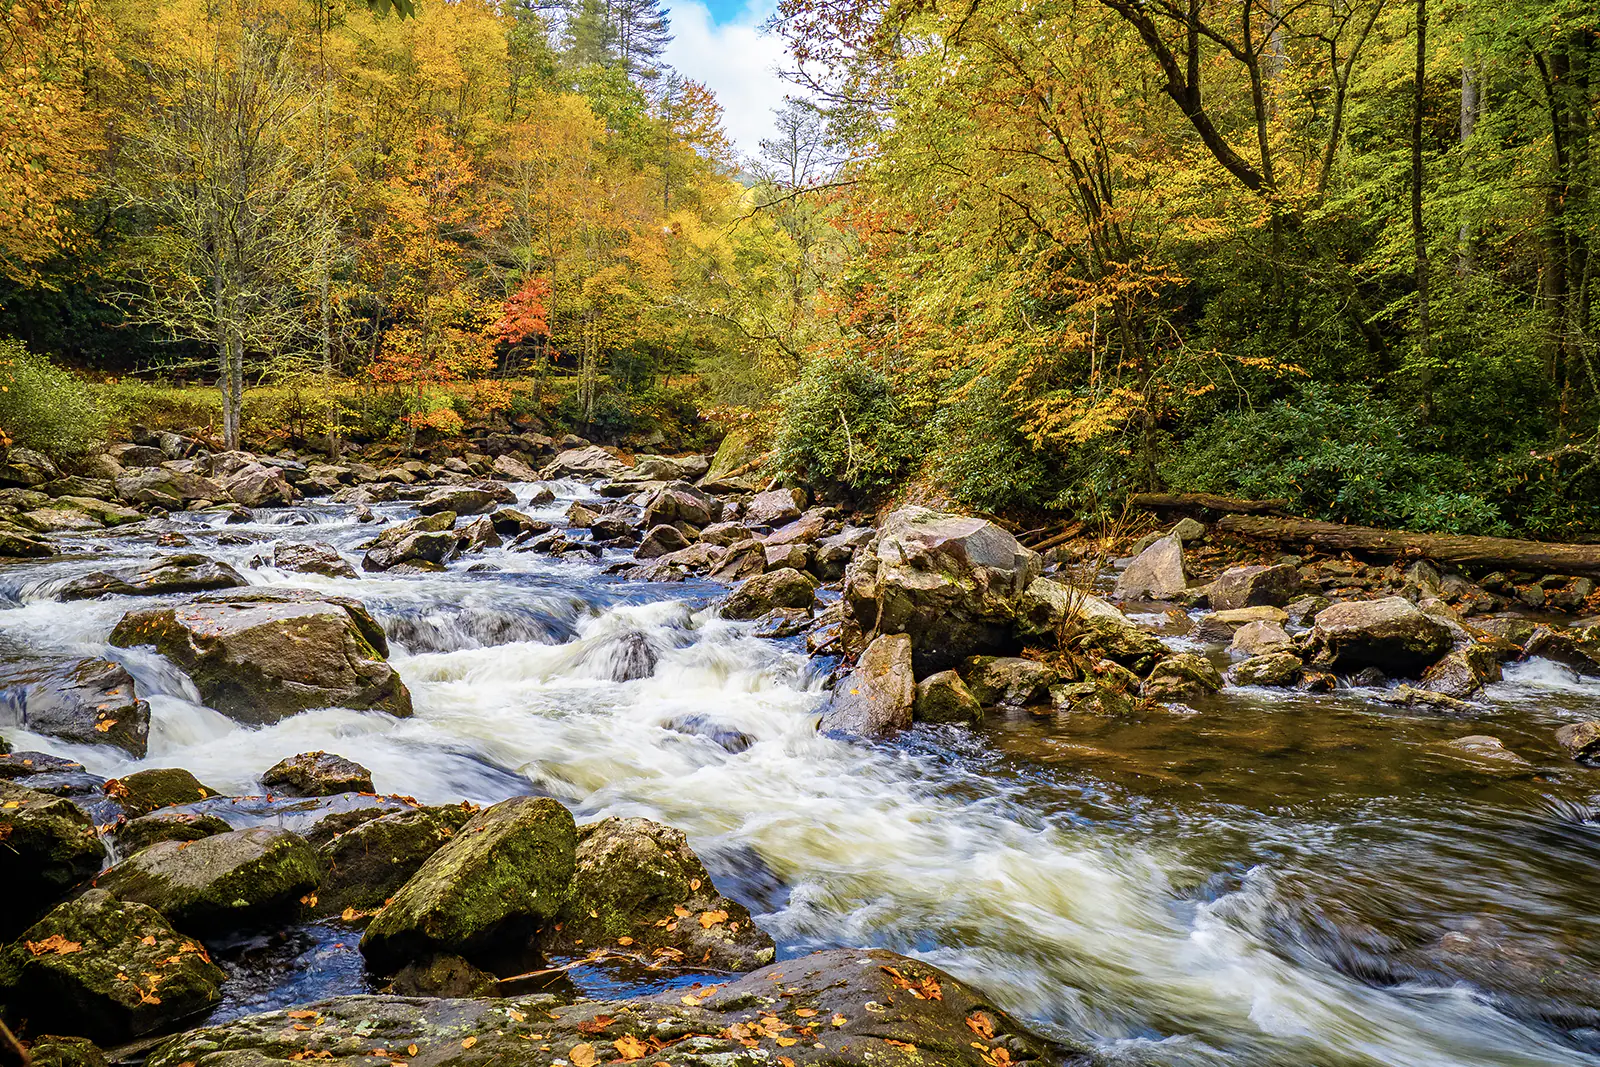 Beautiful landscape of a rushing river in Great Smoky Mountains National Park during the fall season.